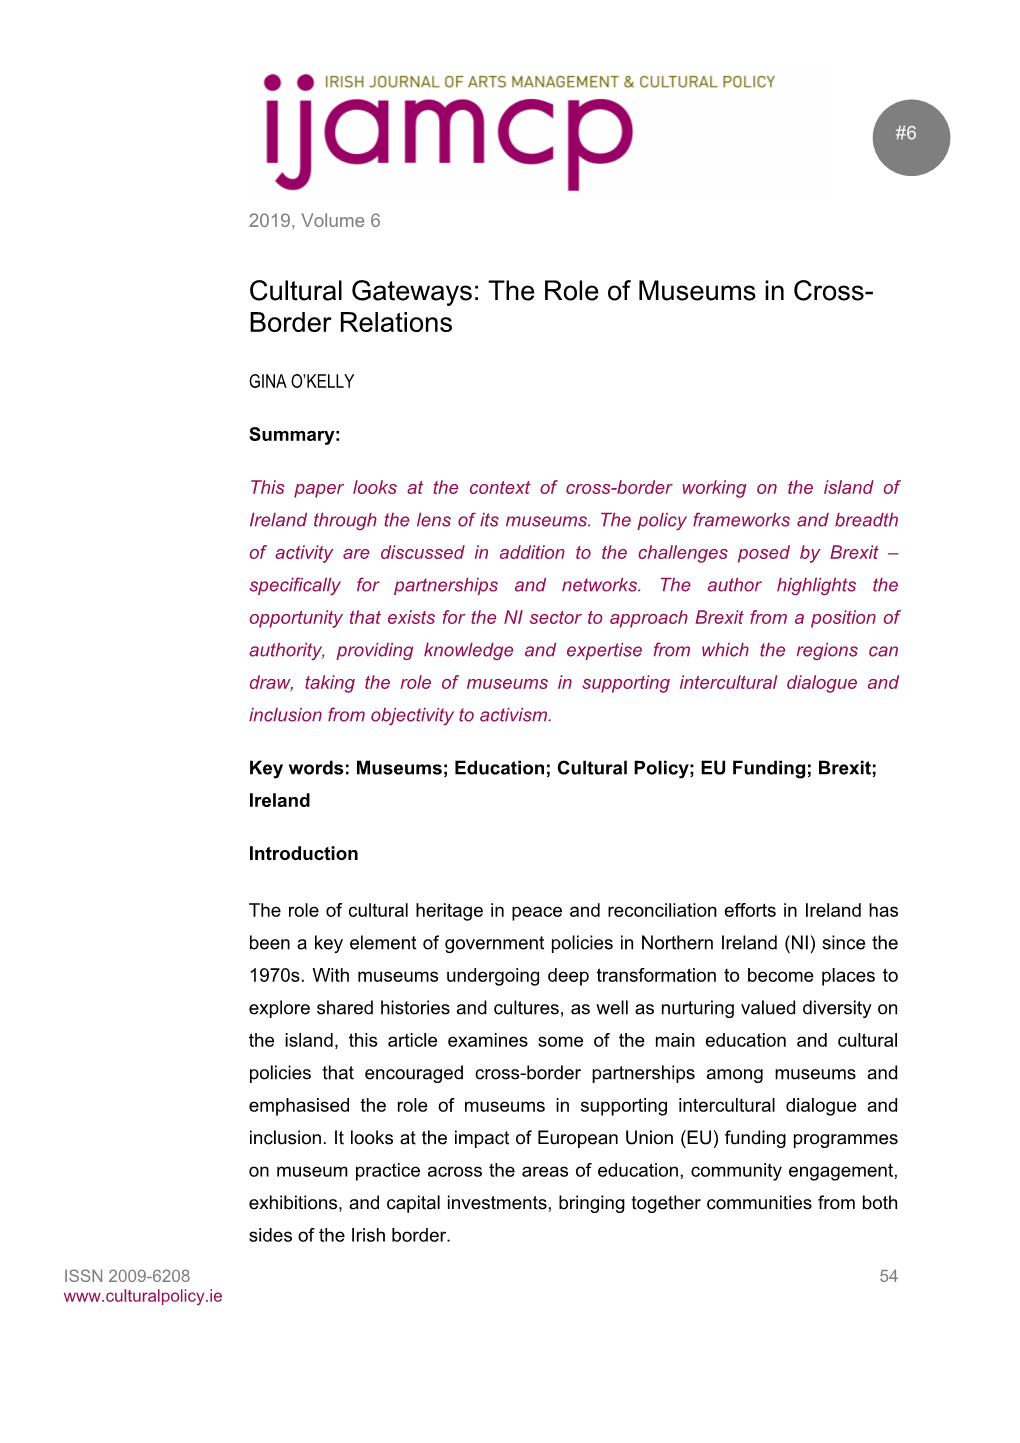 The Role of Museums in Cross-Border Relations